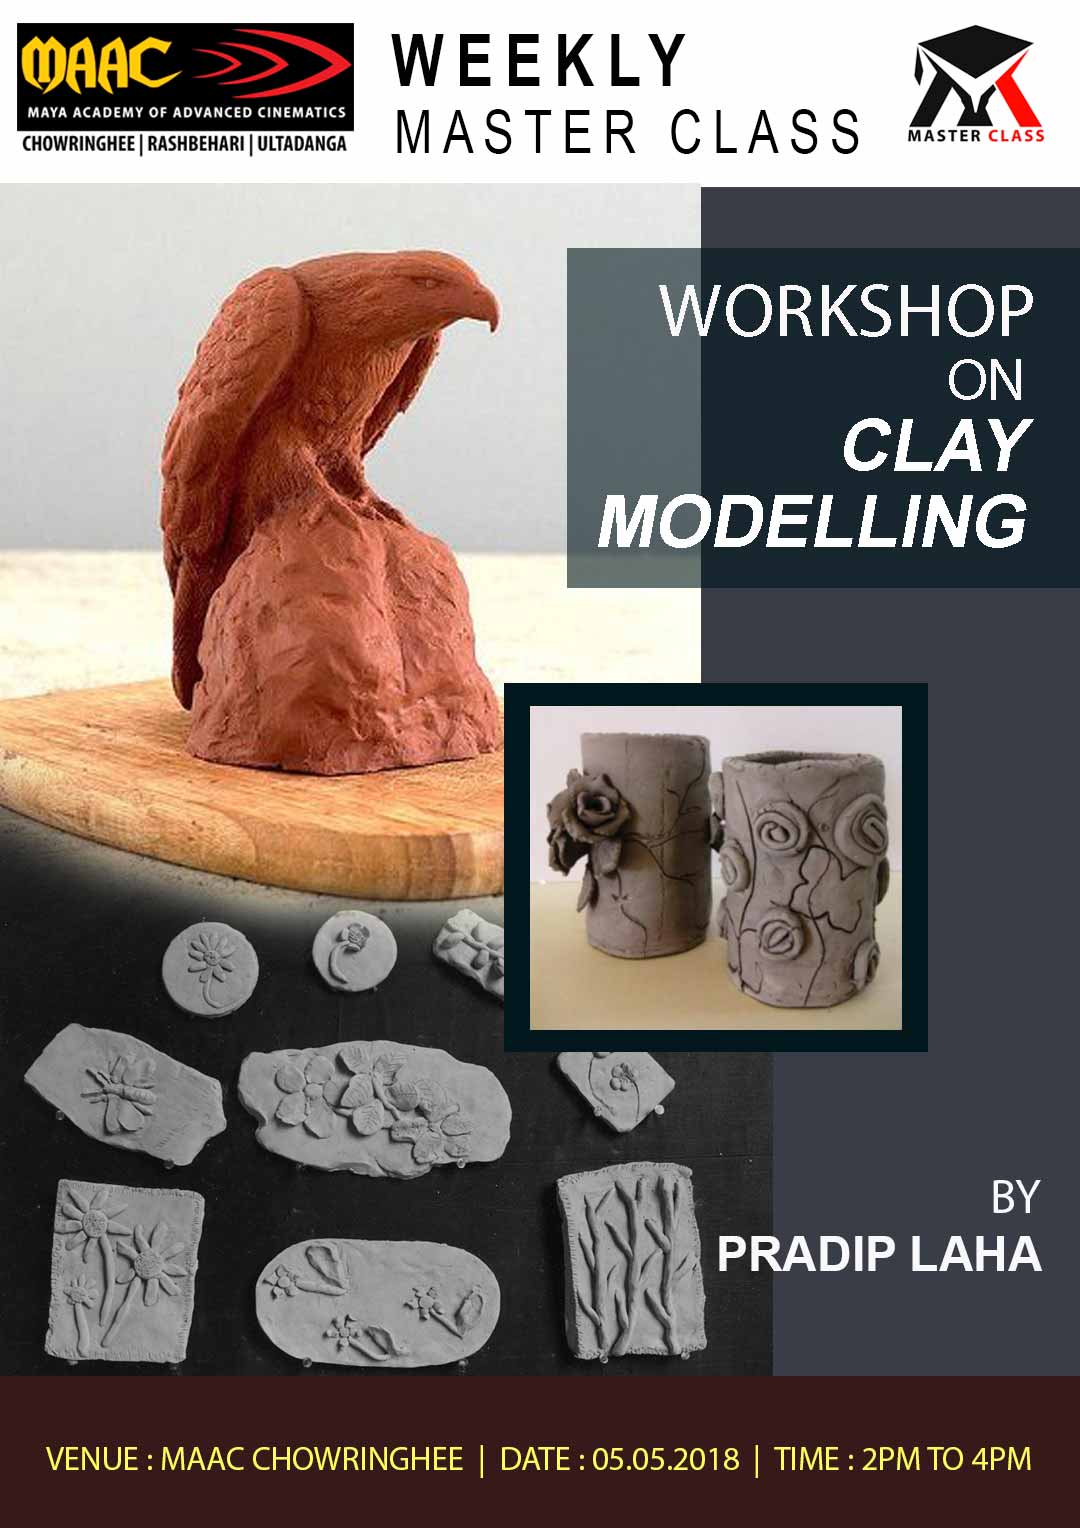 Weekly Master Class on Clay Modelling